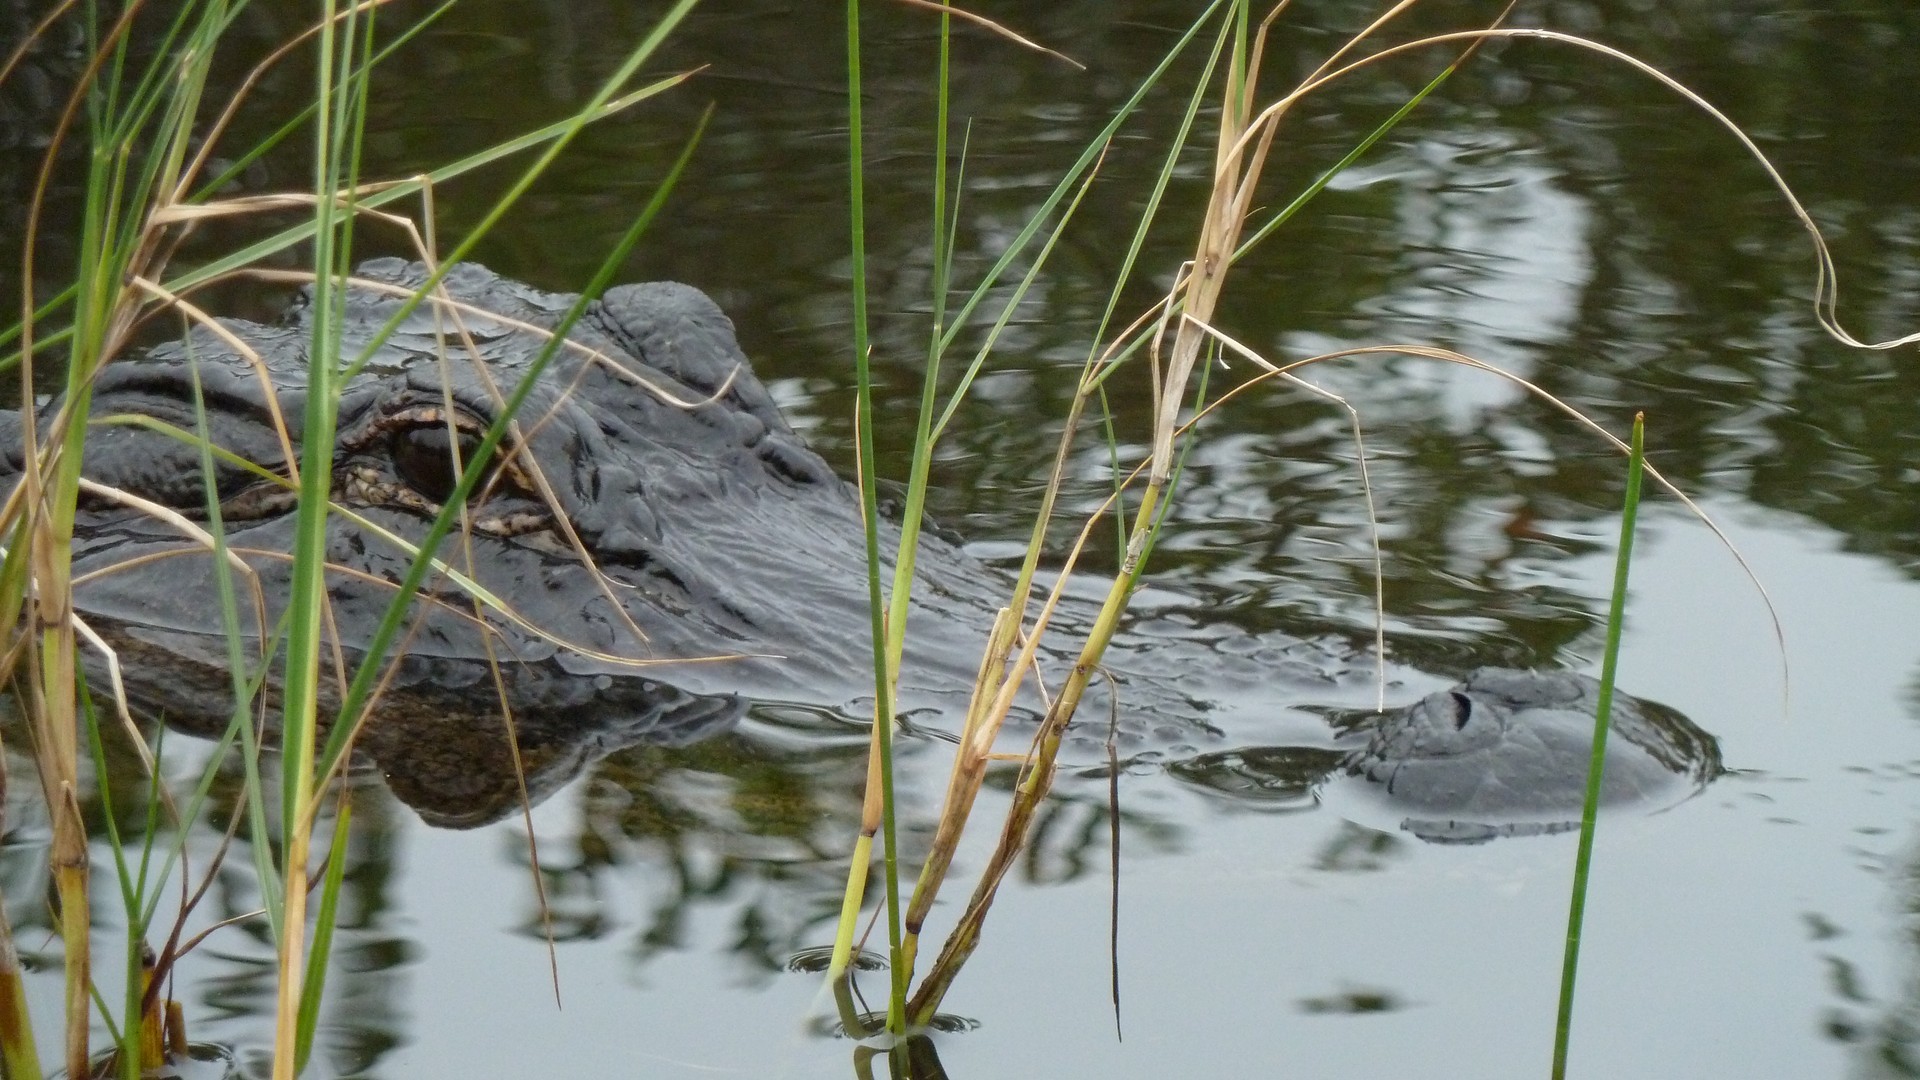 Resident of the Everglades Florida